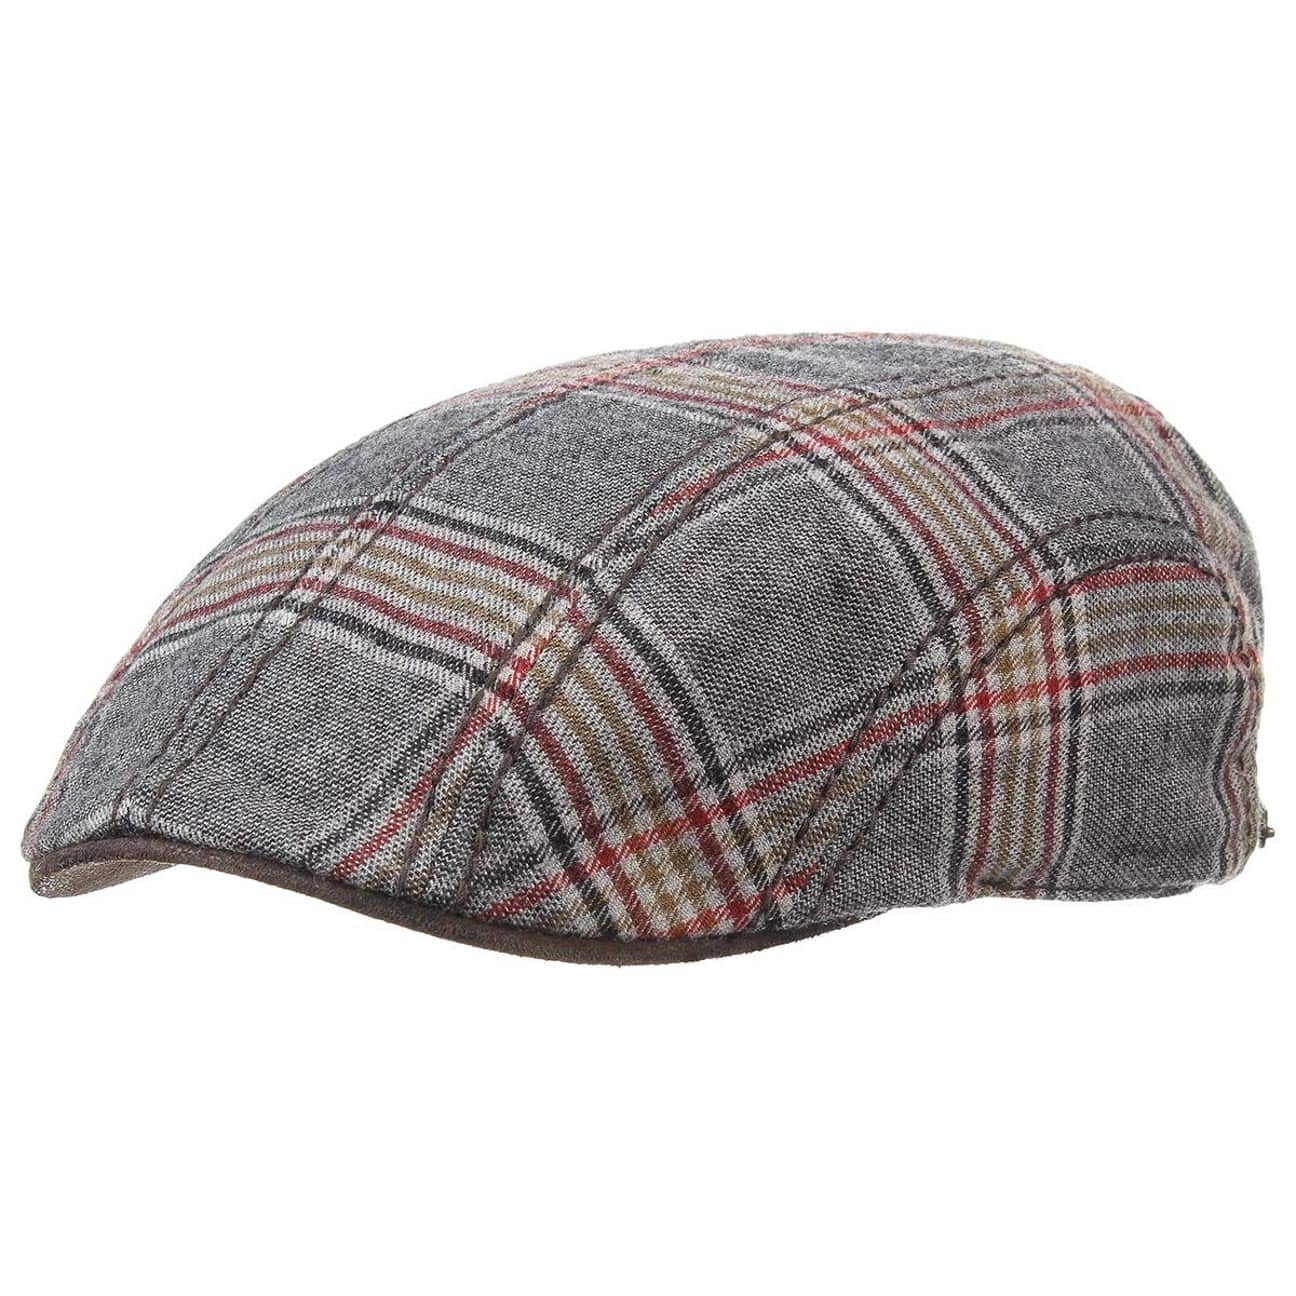 Madison Checked Flat Cap by Stetson, EUR 39,00 --> Hats, caps & beanies ...